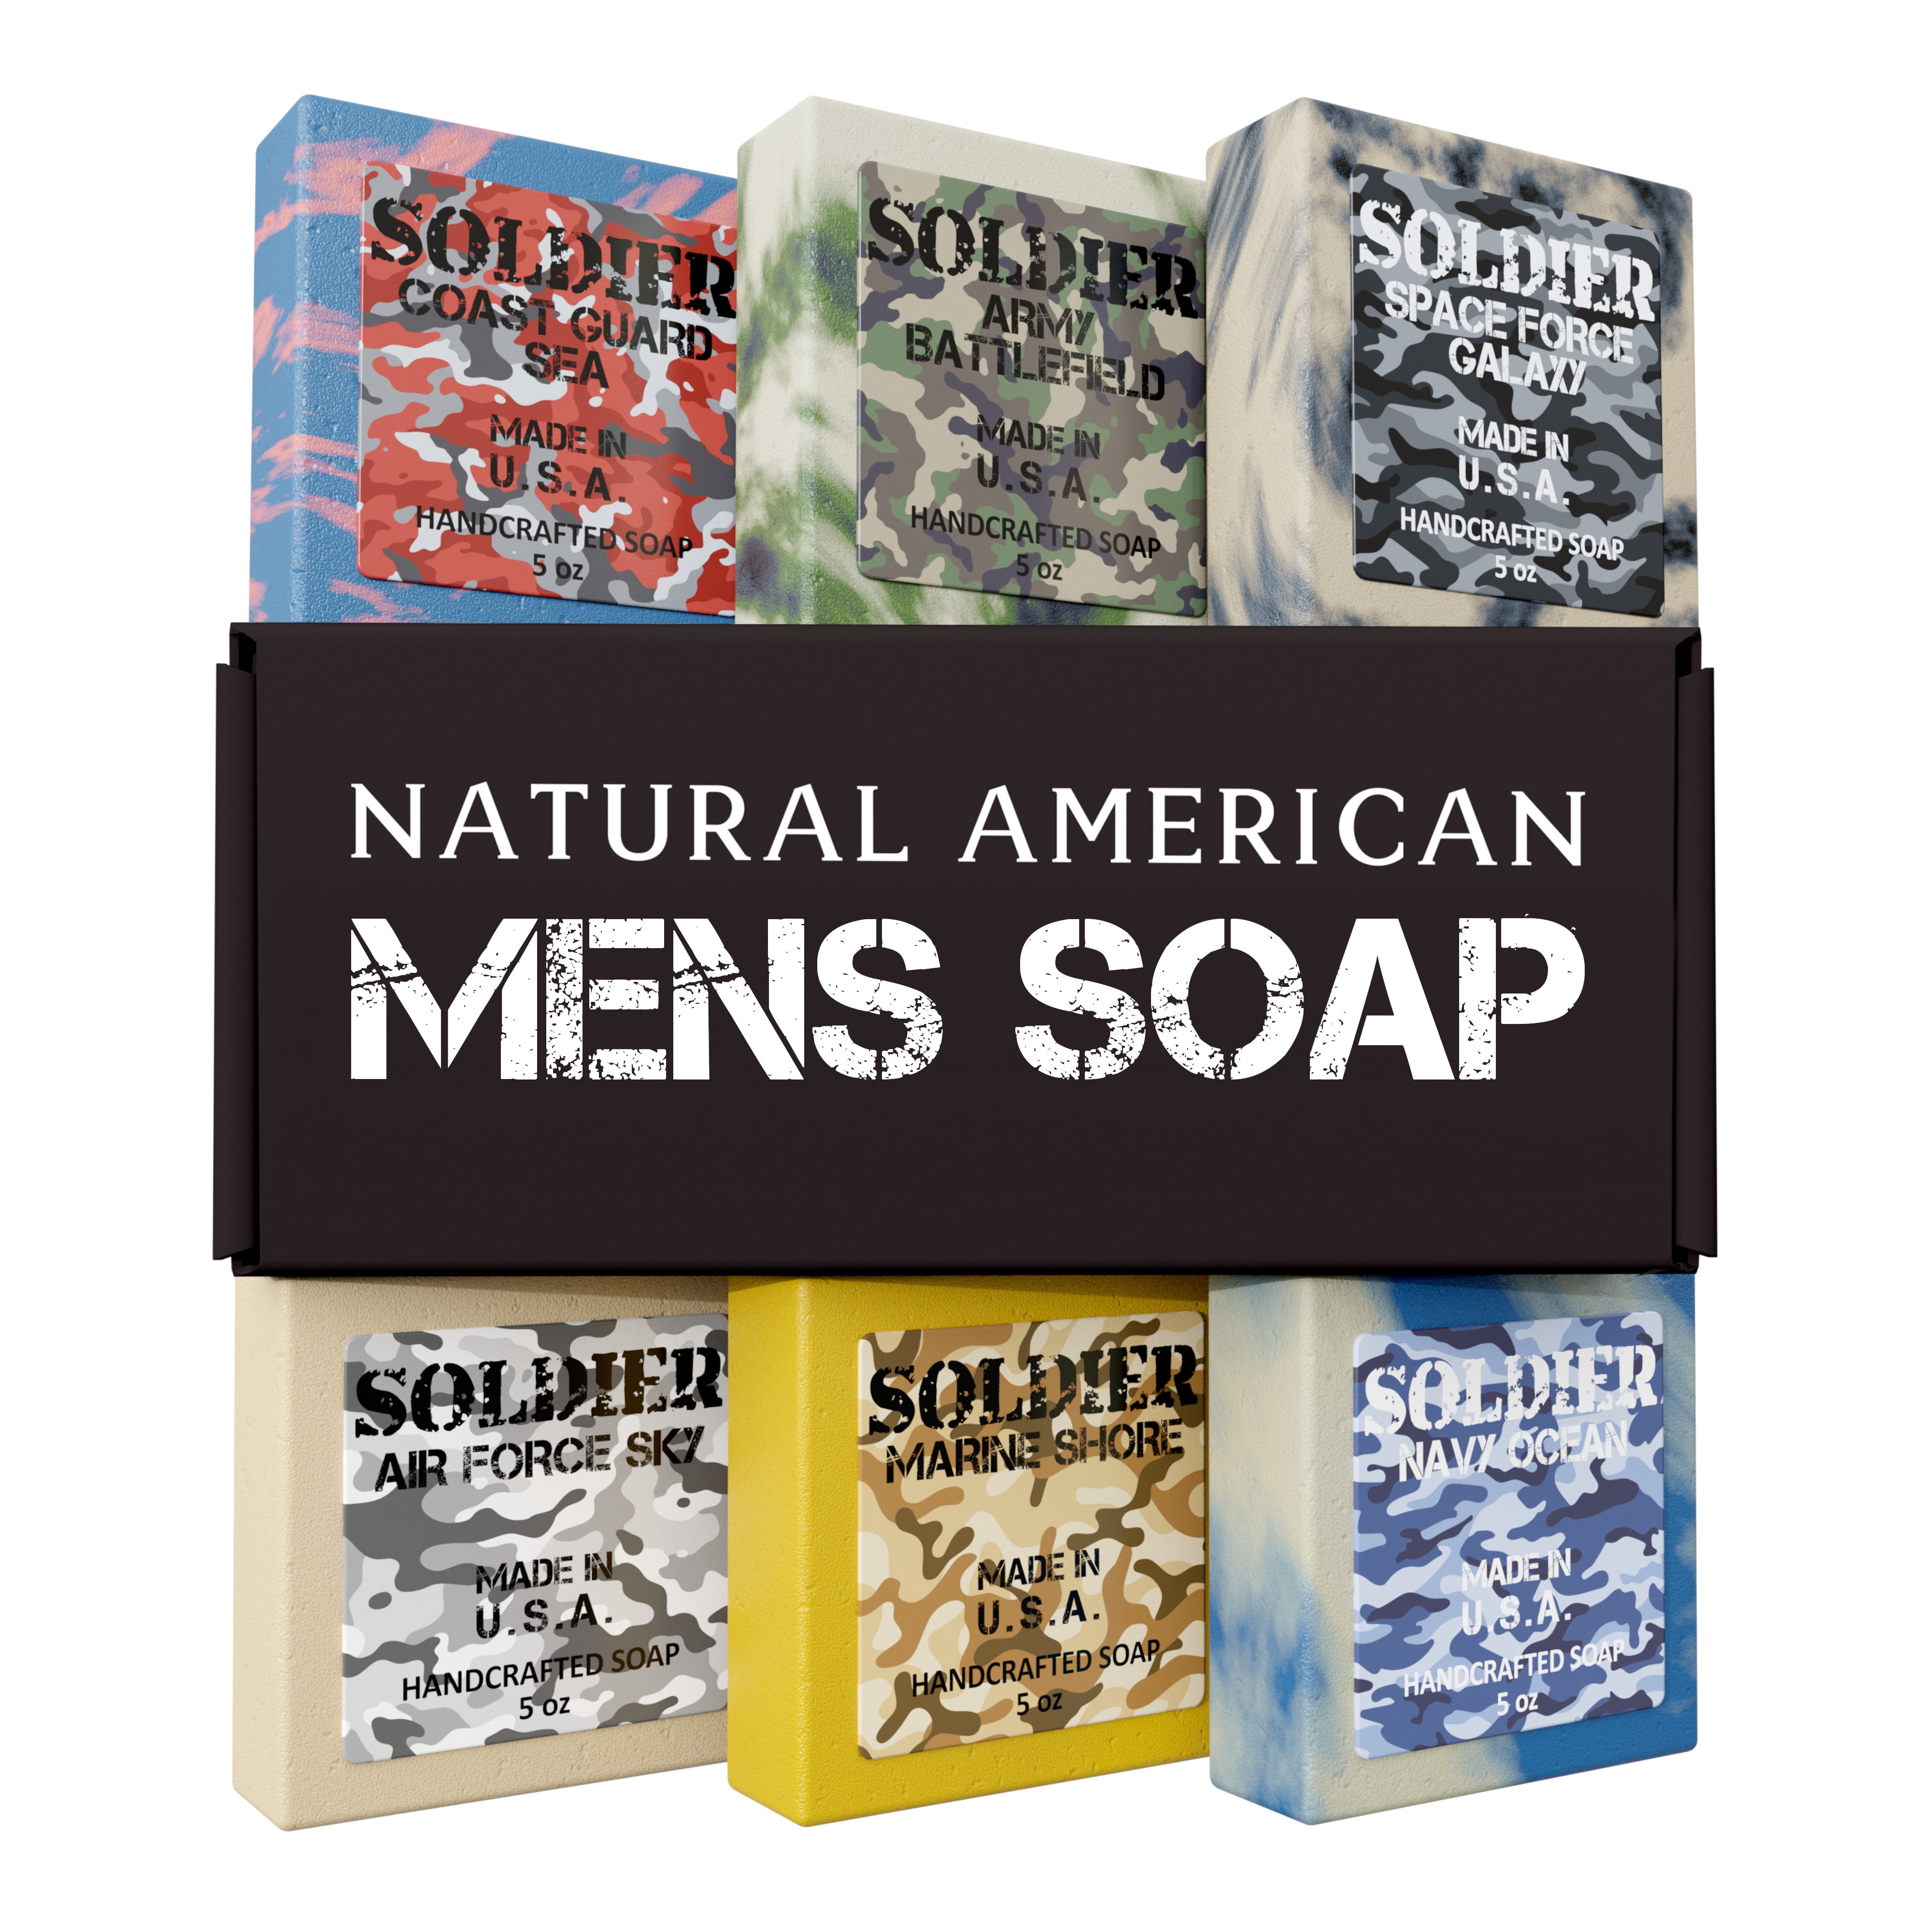 Dr. Jekyll Soap Co. Rocky Coast 5 Bar Pack - Quality Men's Bar Soap, Masculine Scent, No Harmful Chemicals - Aloe Vera and Jojoba Oil - Natural and